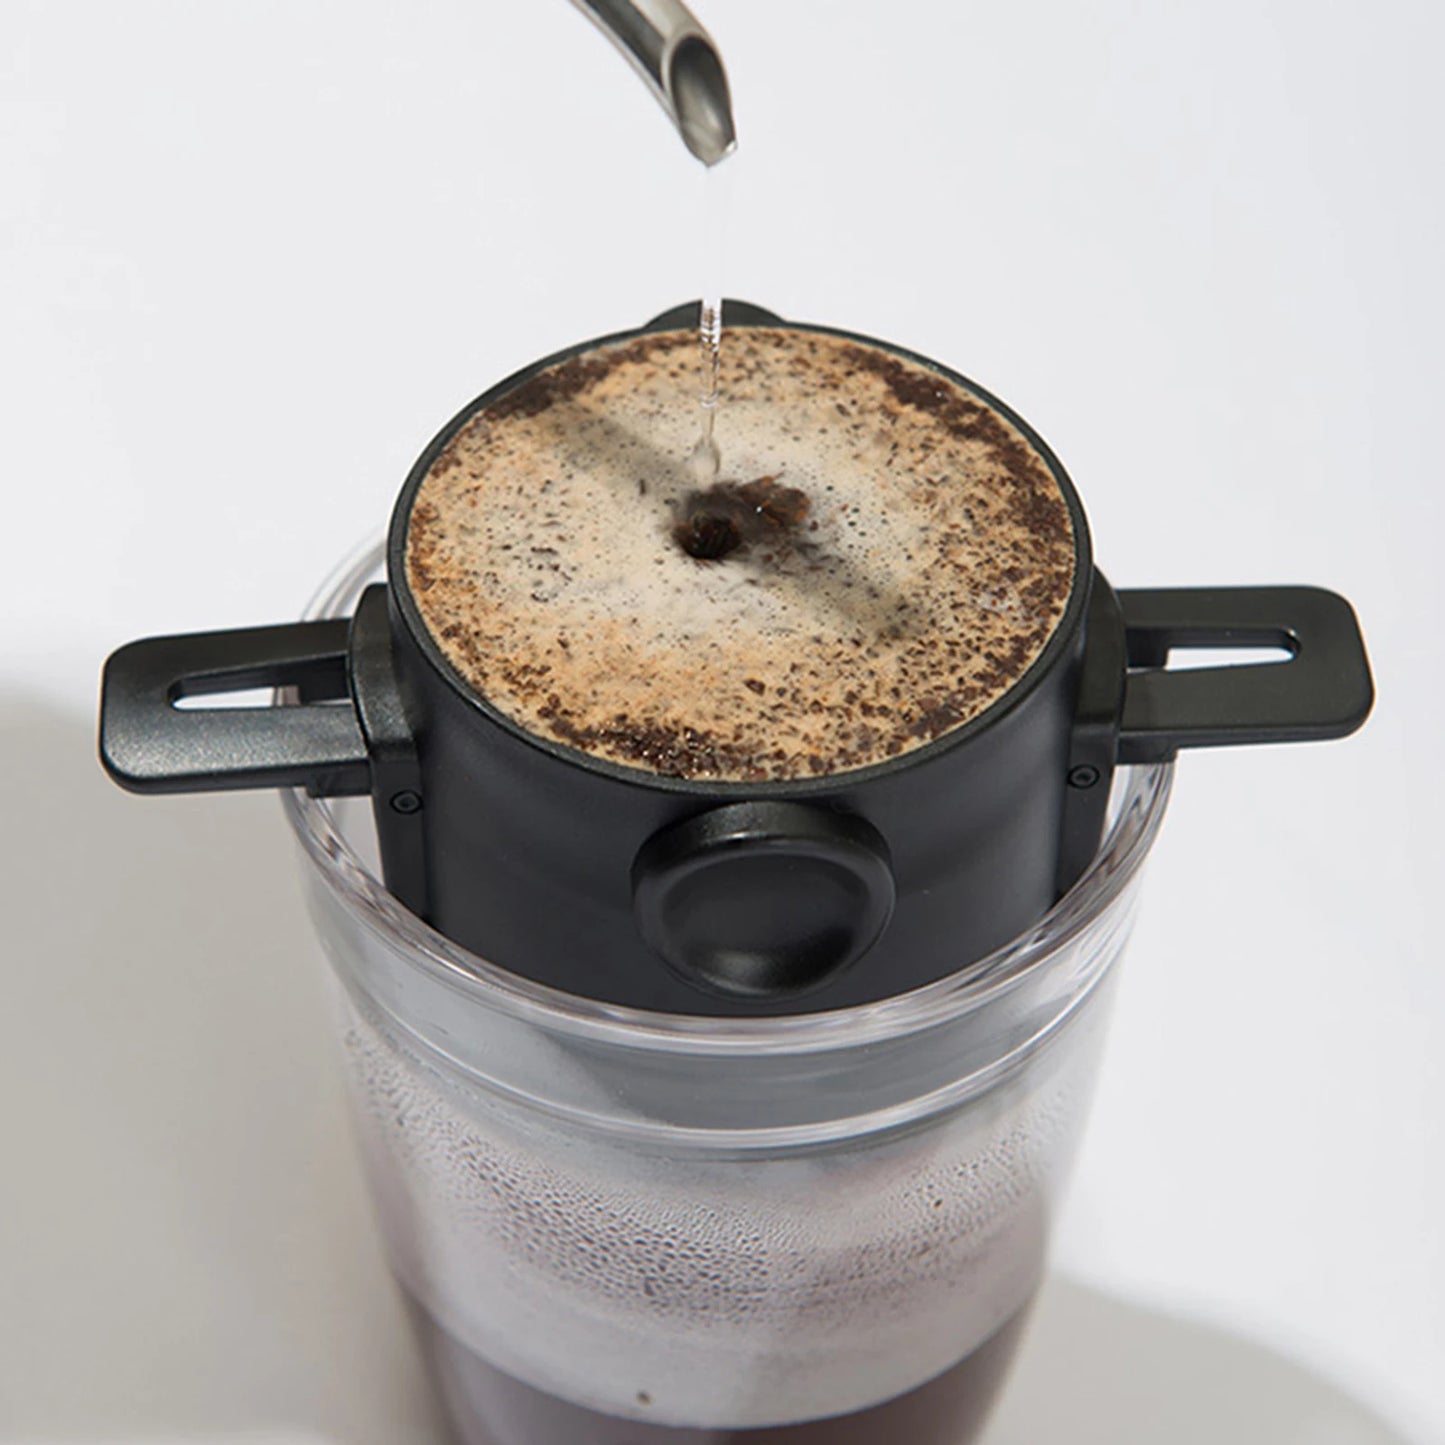 COOLKITS Reusable Coffee Filter